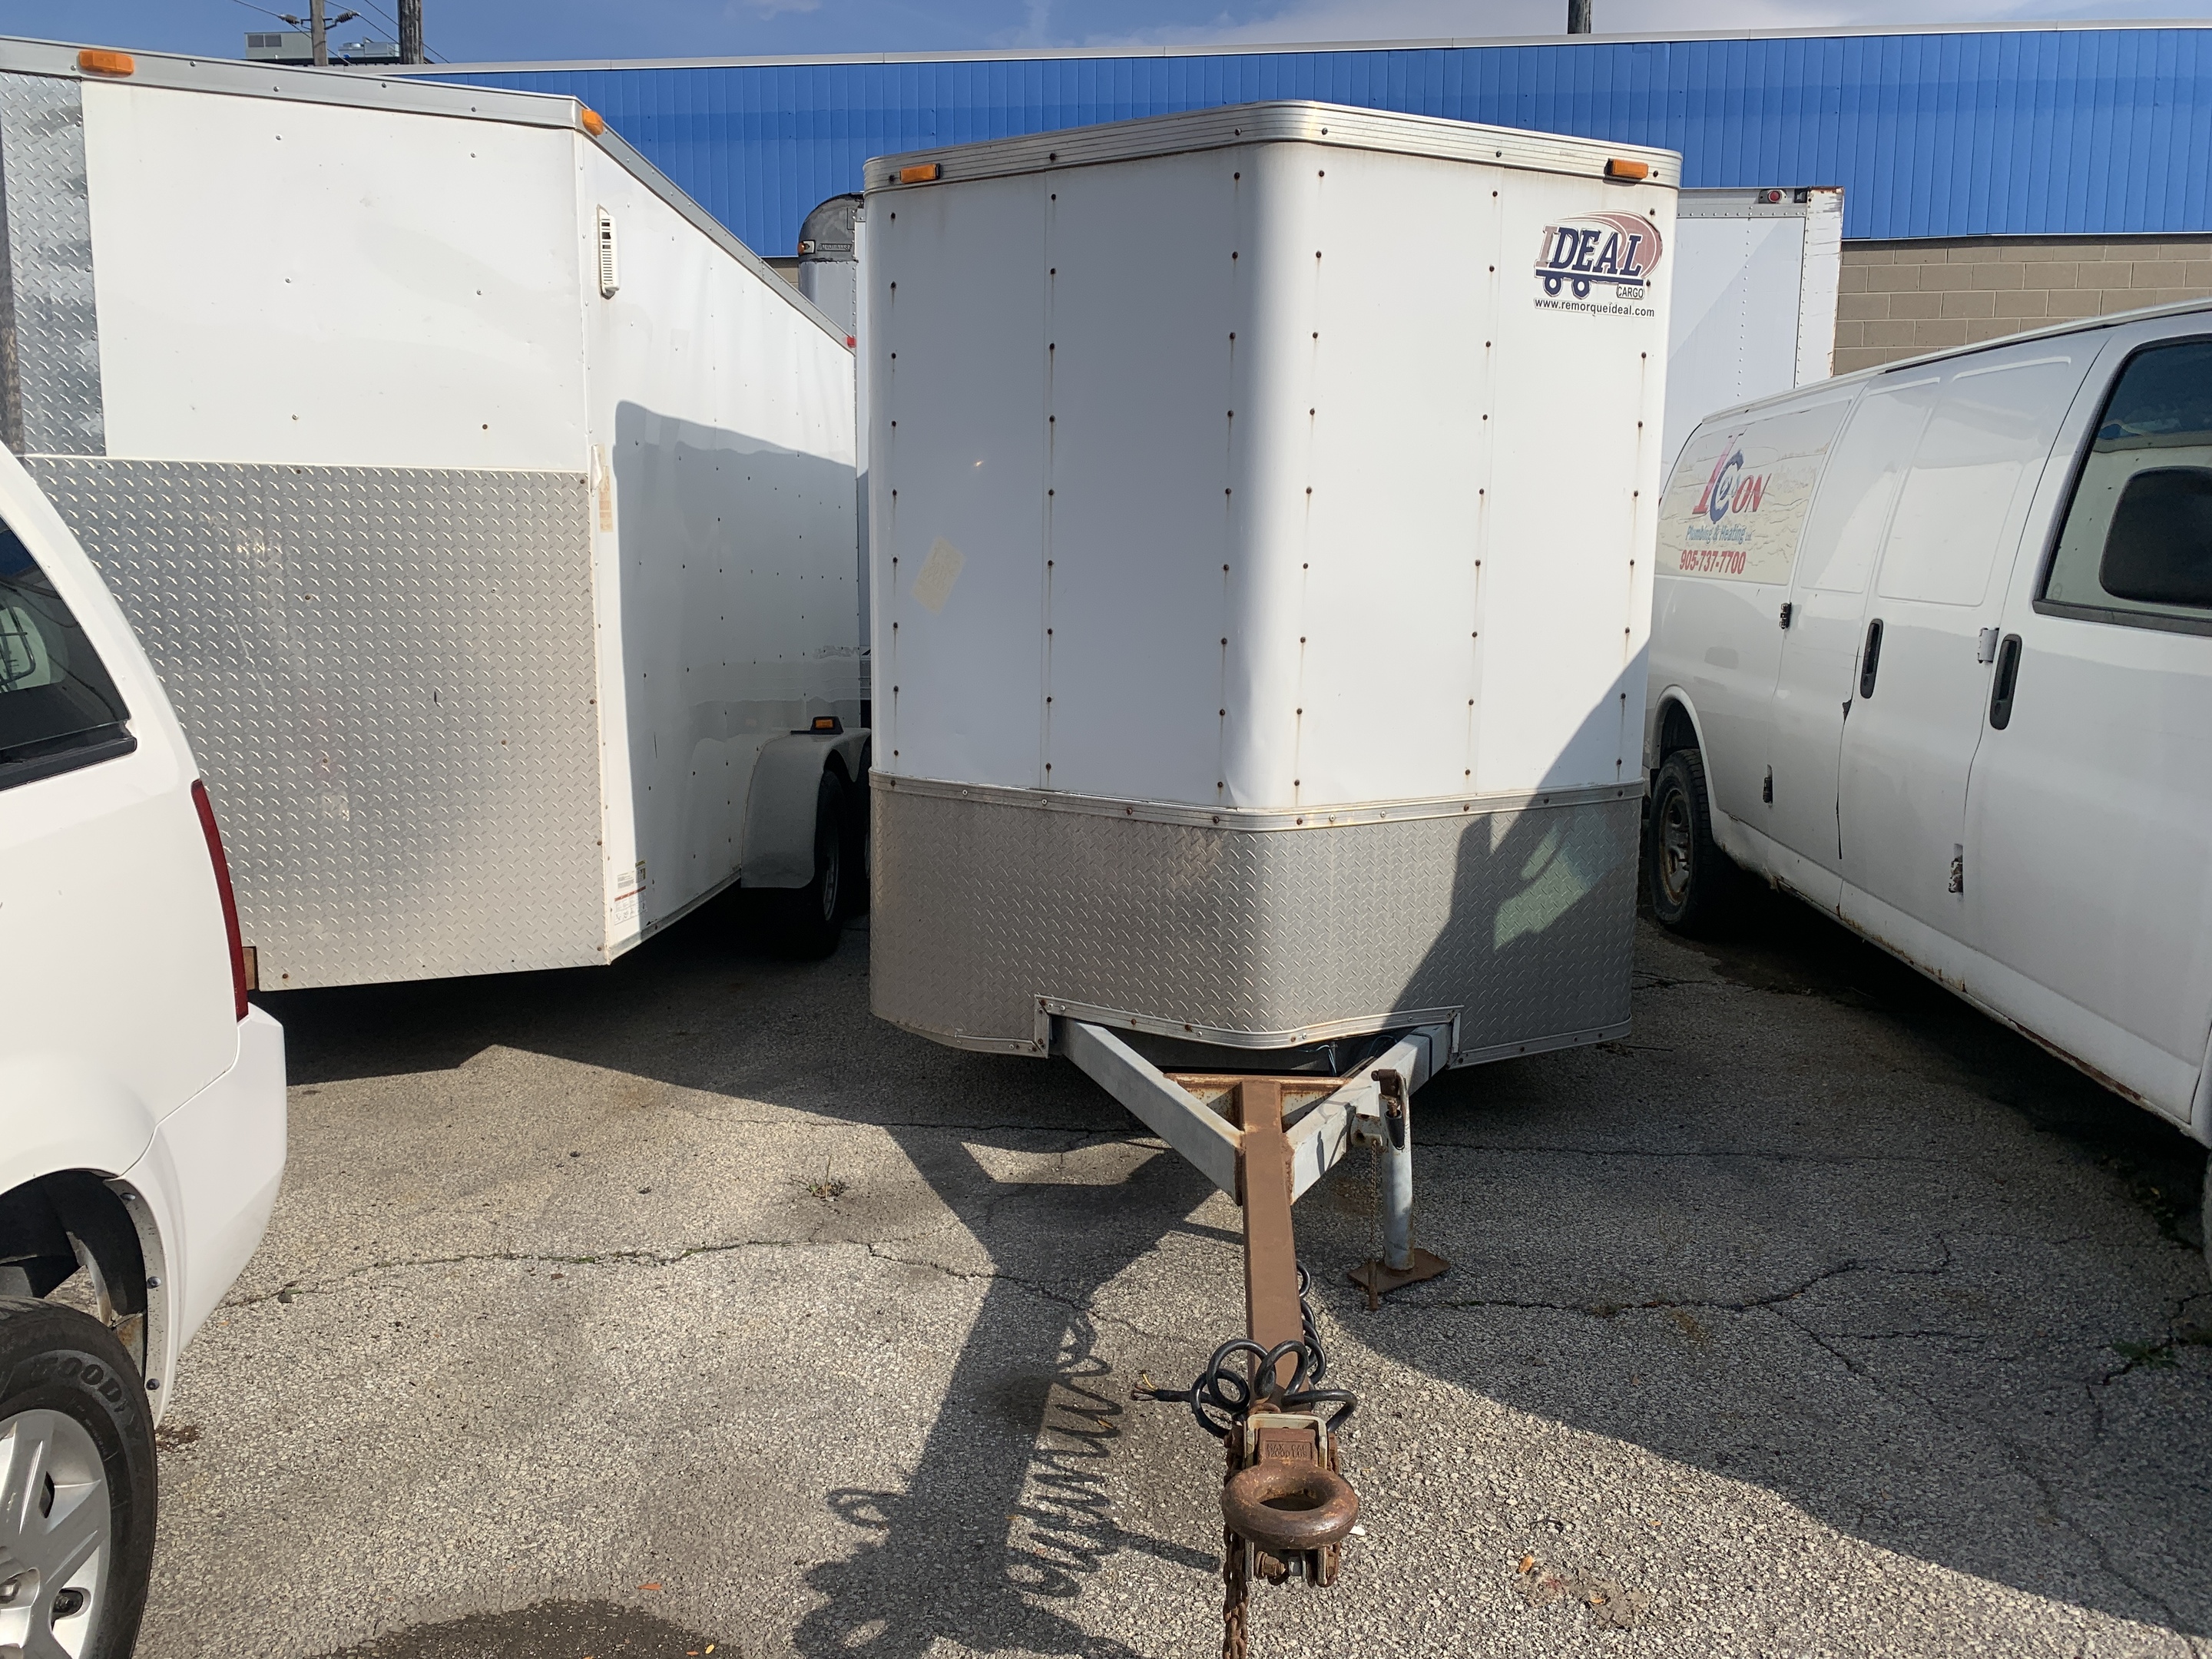 2011 Ideal Work 2011 IDEAL ENCLOSED TRAILER SOLD SOLD SOLD !!!